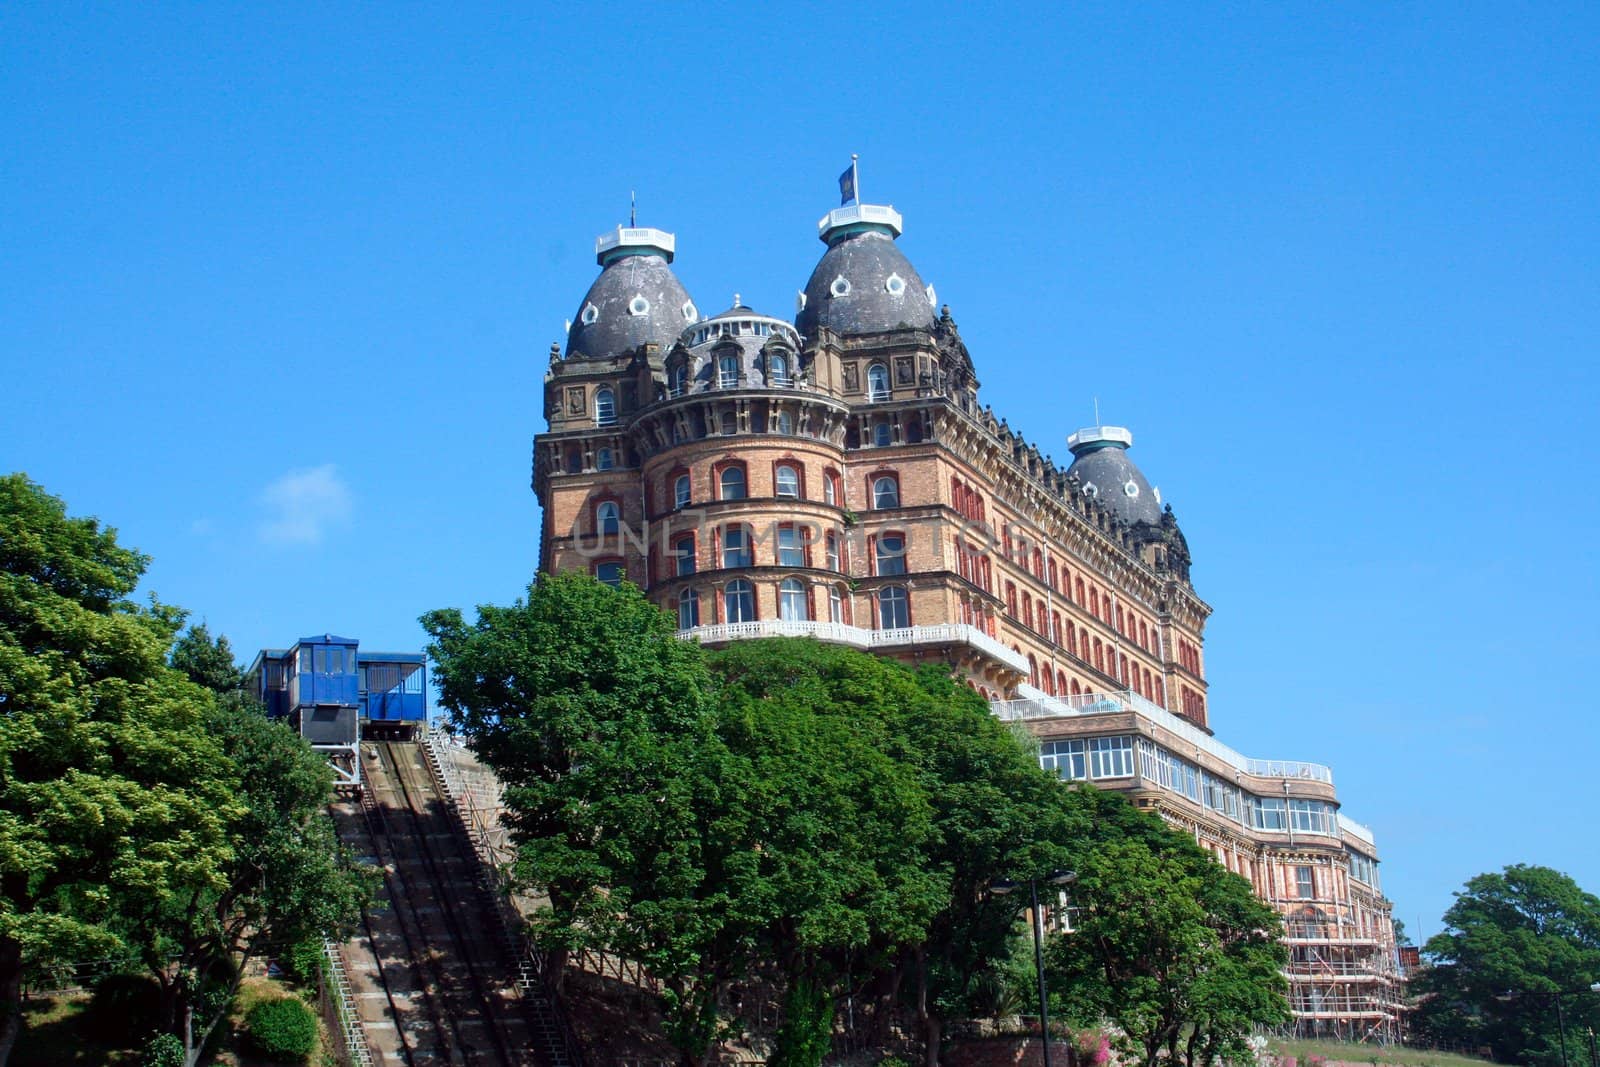 Gothic architecture of Grand hotel building, Scarborough, England.